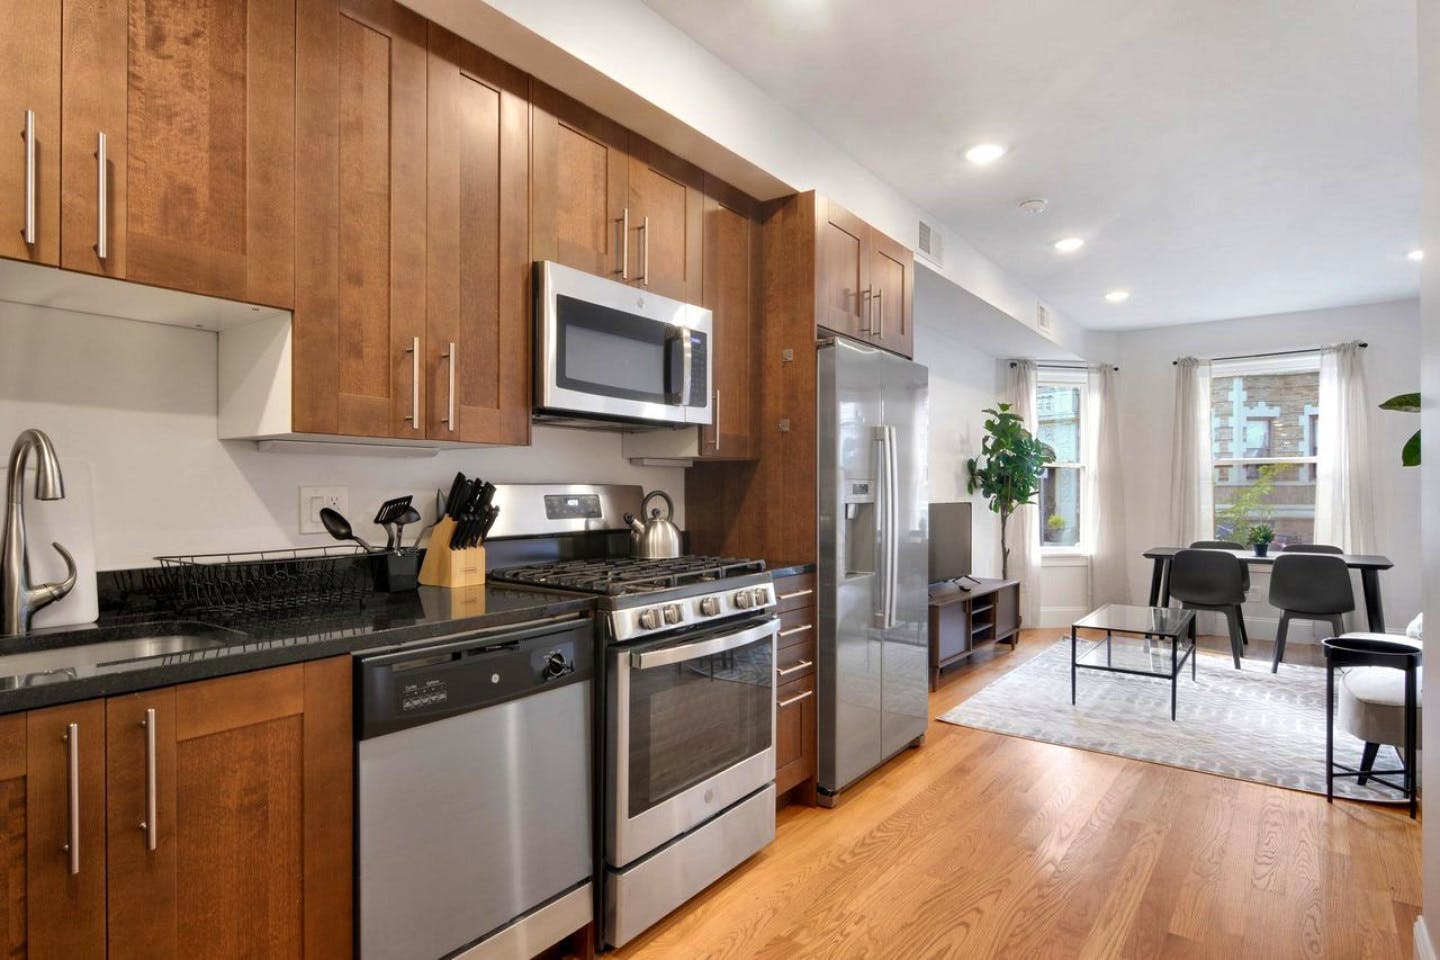 Outstanding Luxury House close to Warren Street and Alston Street Metro Station